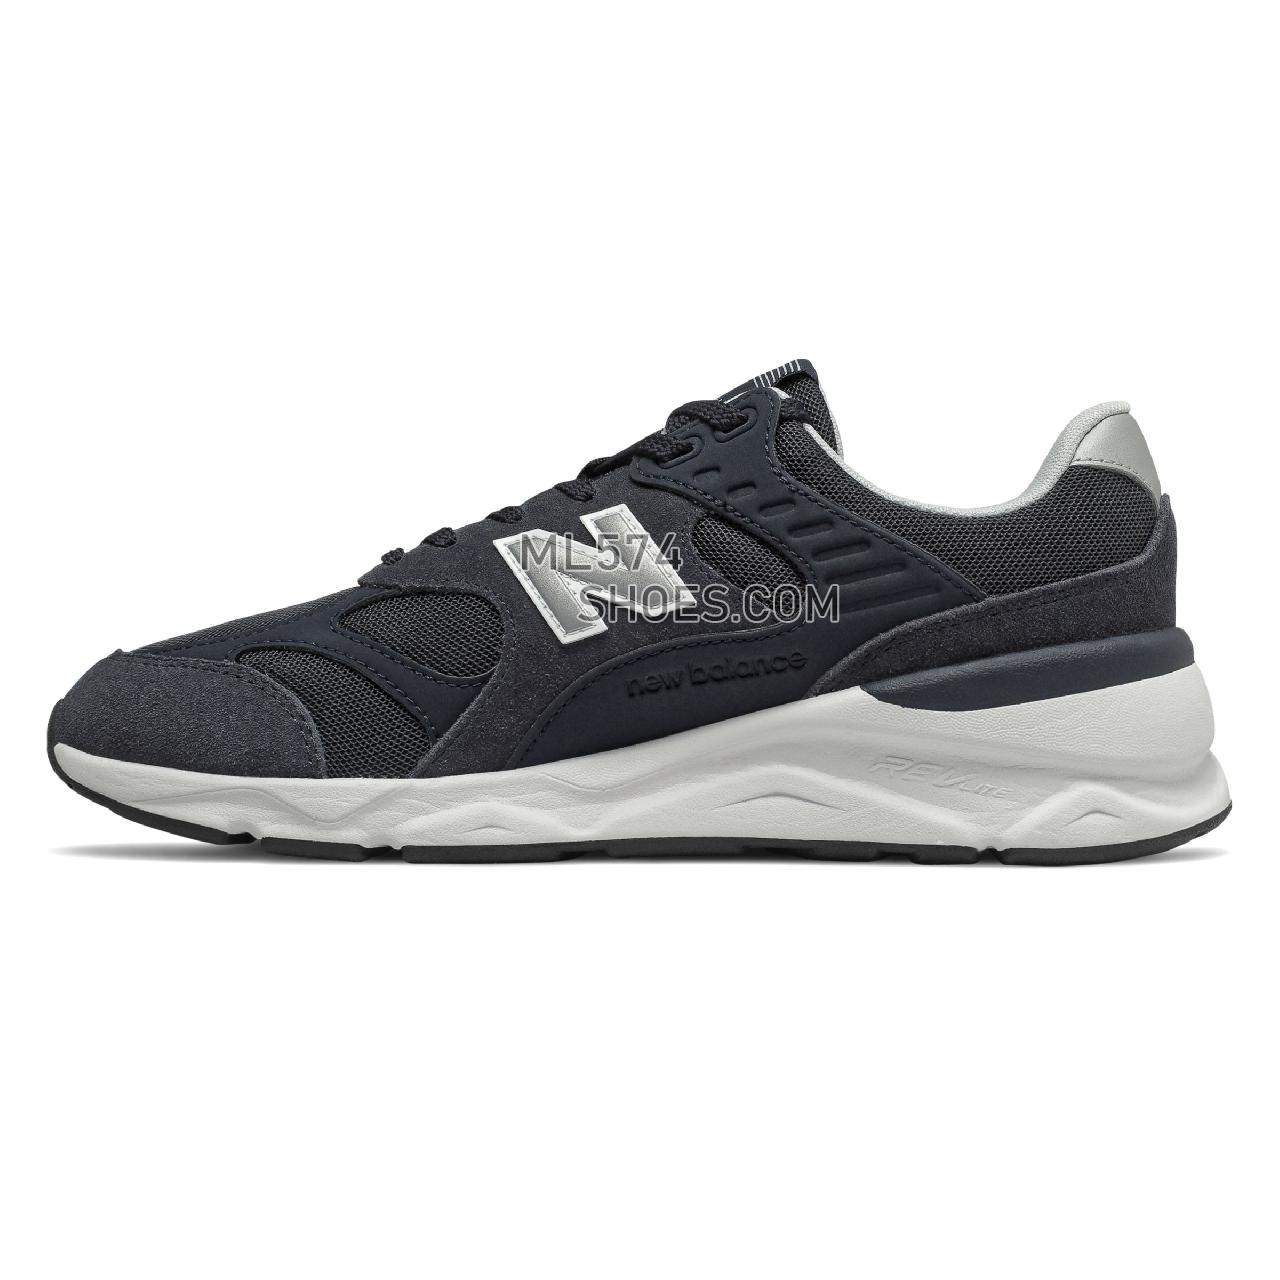 New Balance X-90 Reconstructed - Men's X-90 Reconstructed Classic - Outerspace with Orion Blue - MSX90TTD